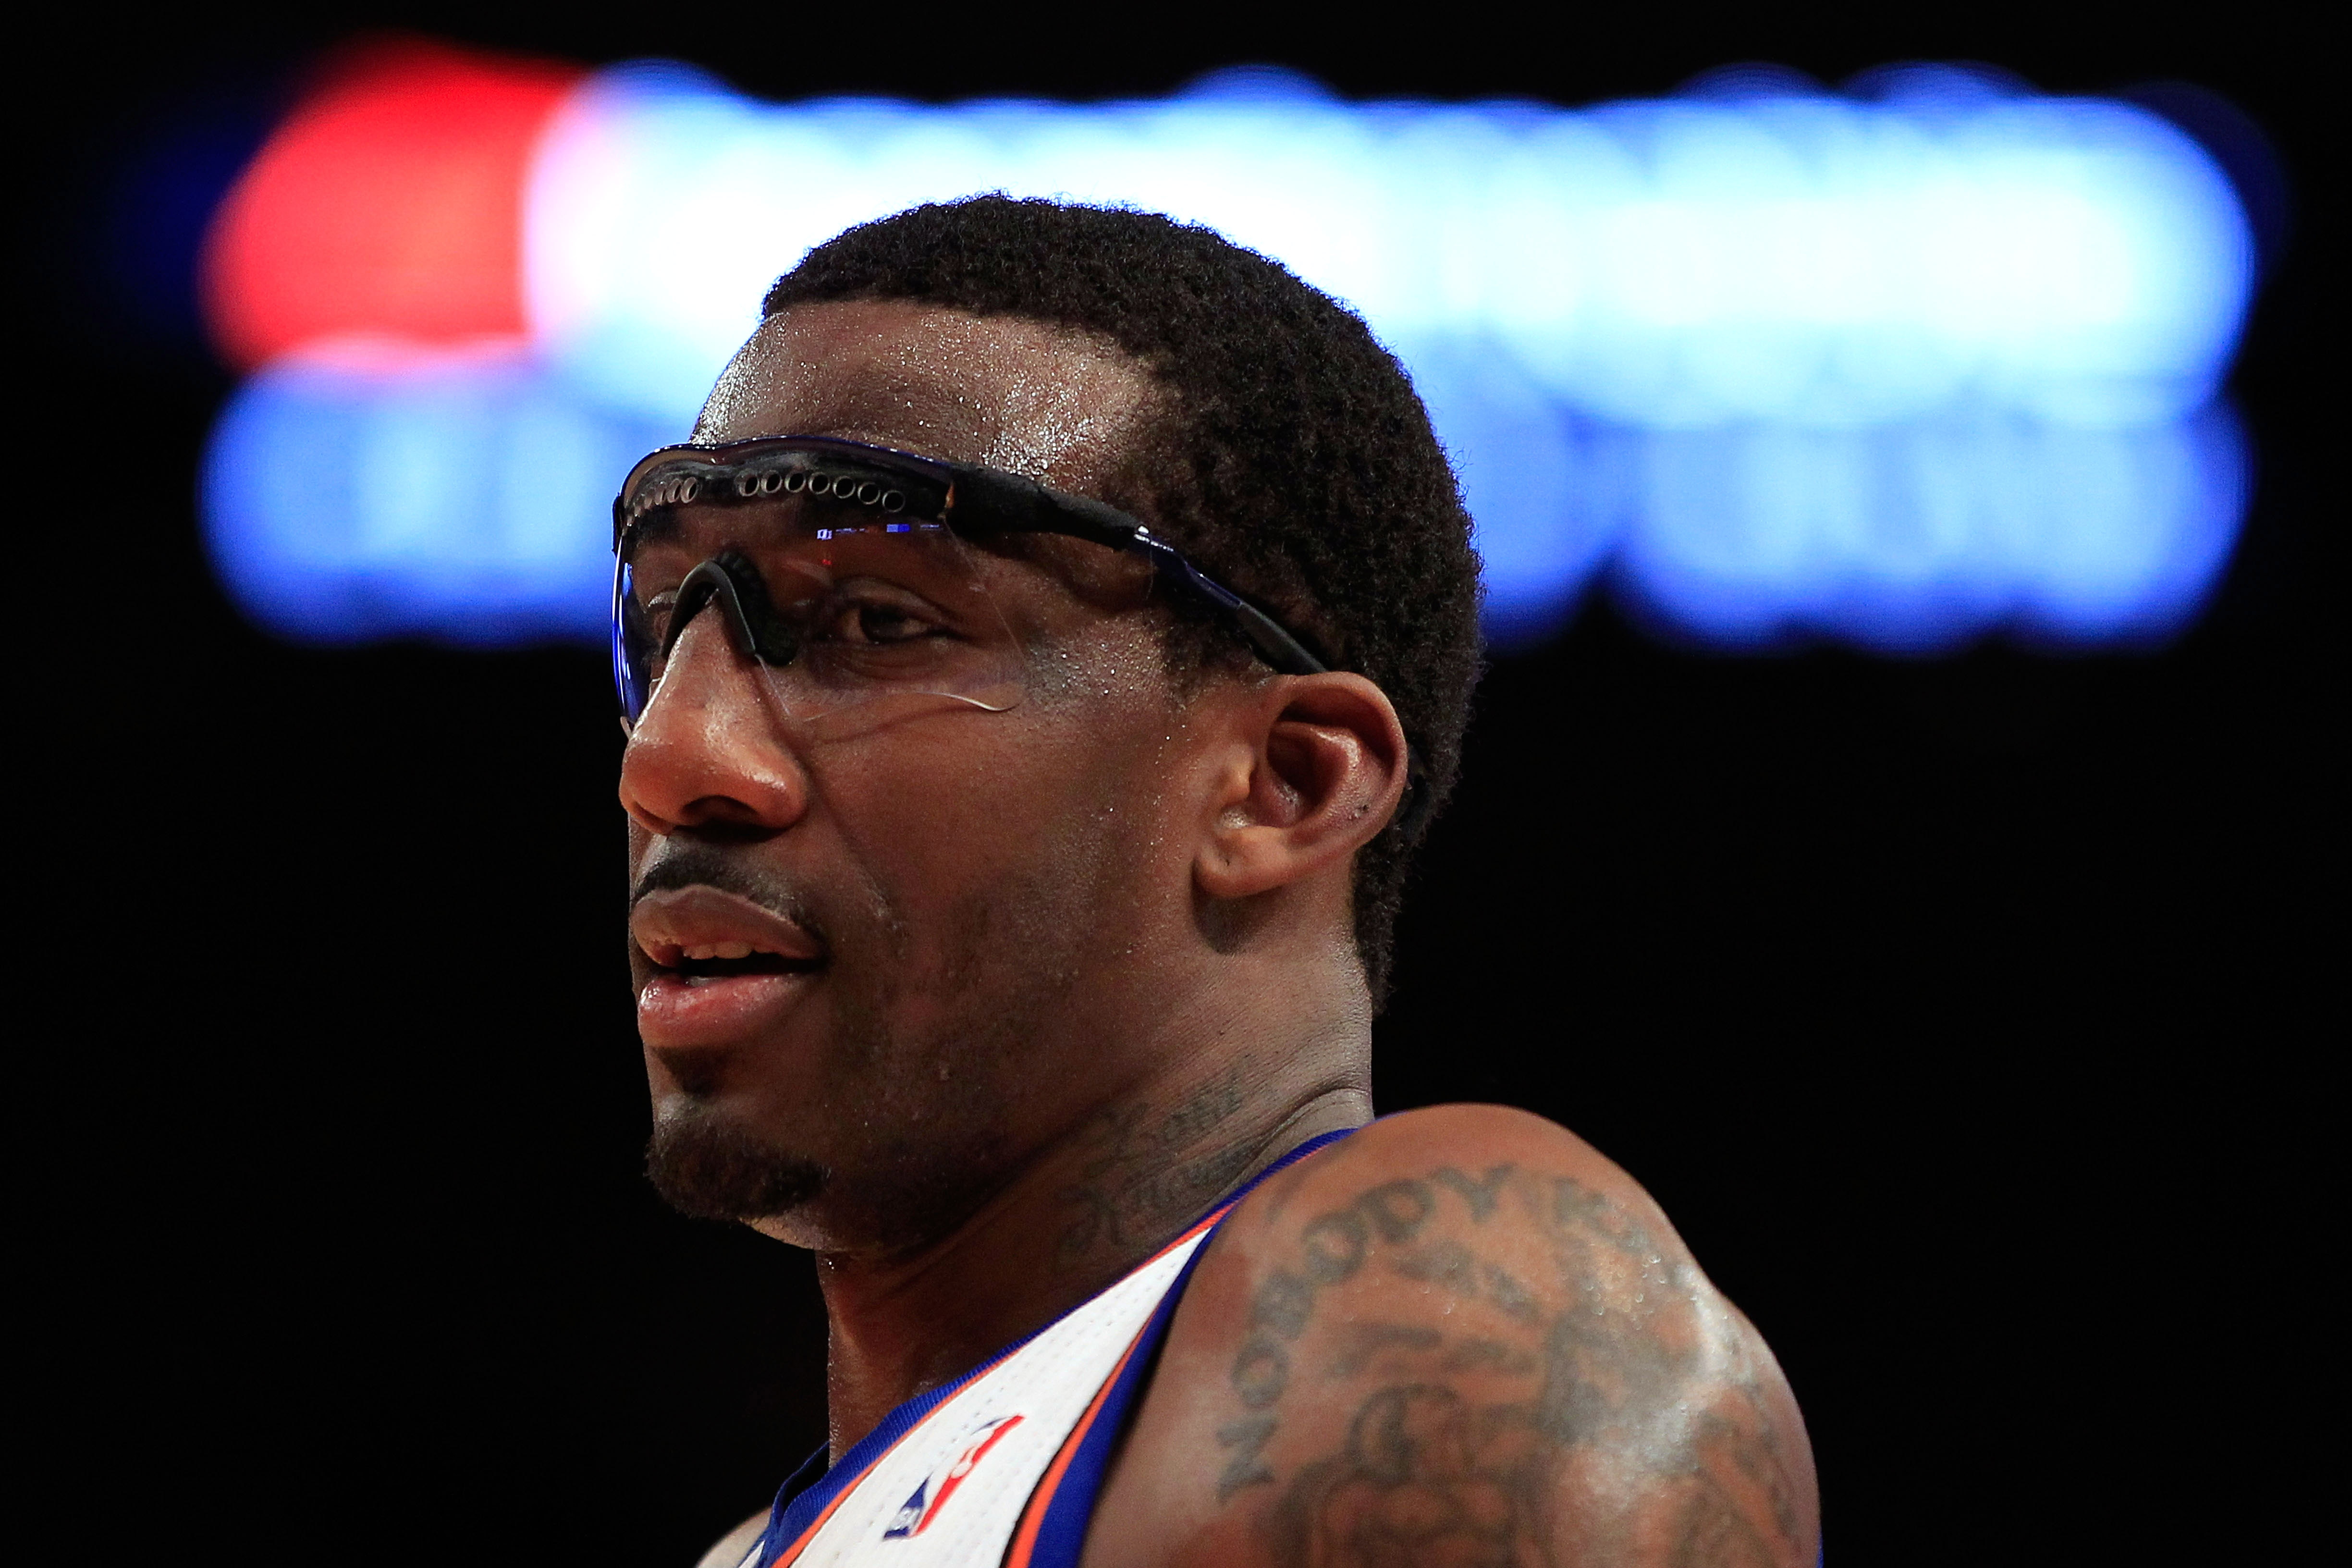 NEW YORK, NY - JANUARY 14:  Amar'e Stoudemire#1 of the New York Knicks looks on on the court during the game against the Sacramento Kings at Madison Square Garden on January 14, 2011 in New York City. NOTE TO USER: User expressly acknowledges and agrees t